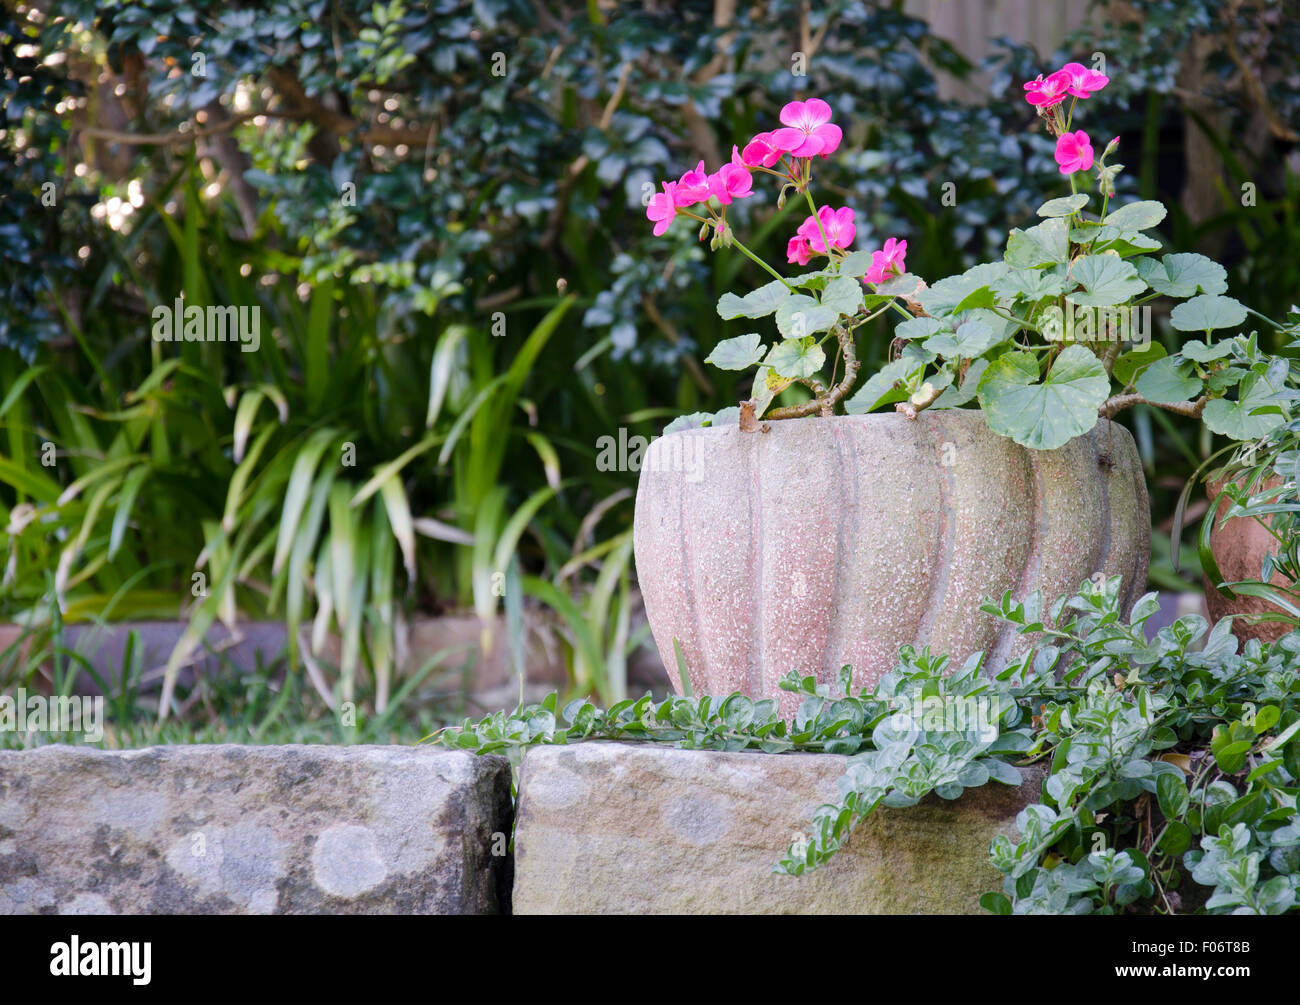 A bright pink Geranium flowers in a pot in a shady corner of a garden beside a sandstone wall in Sydney Australia Stock Photo